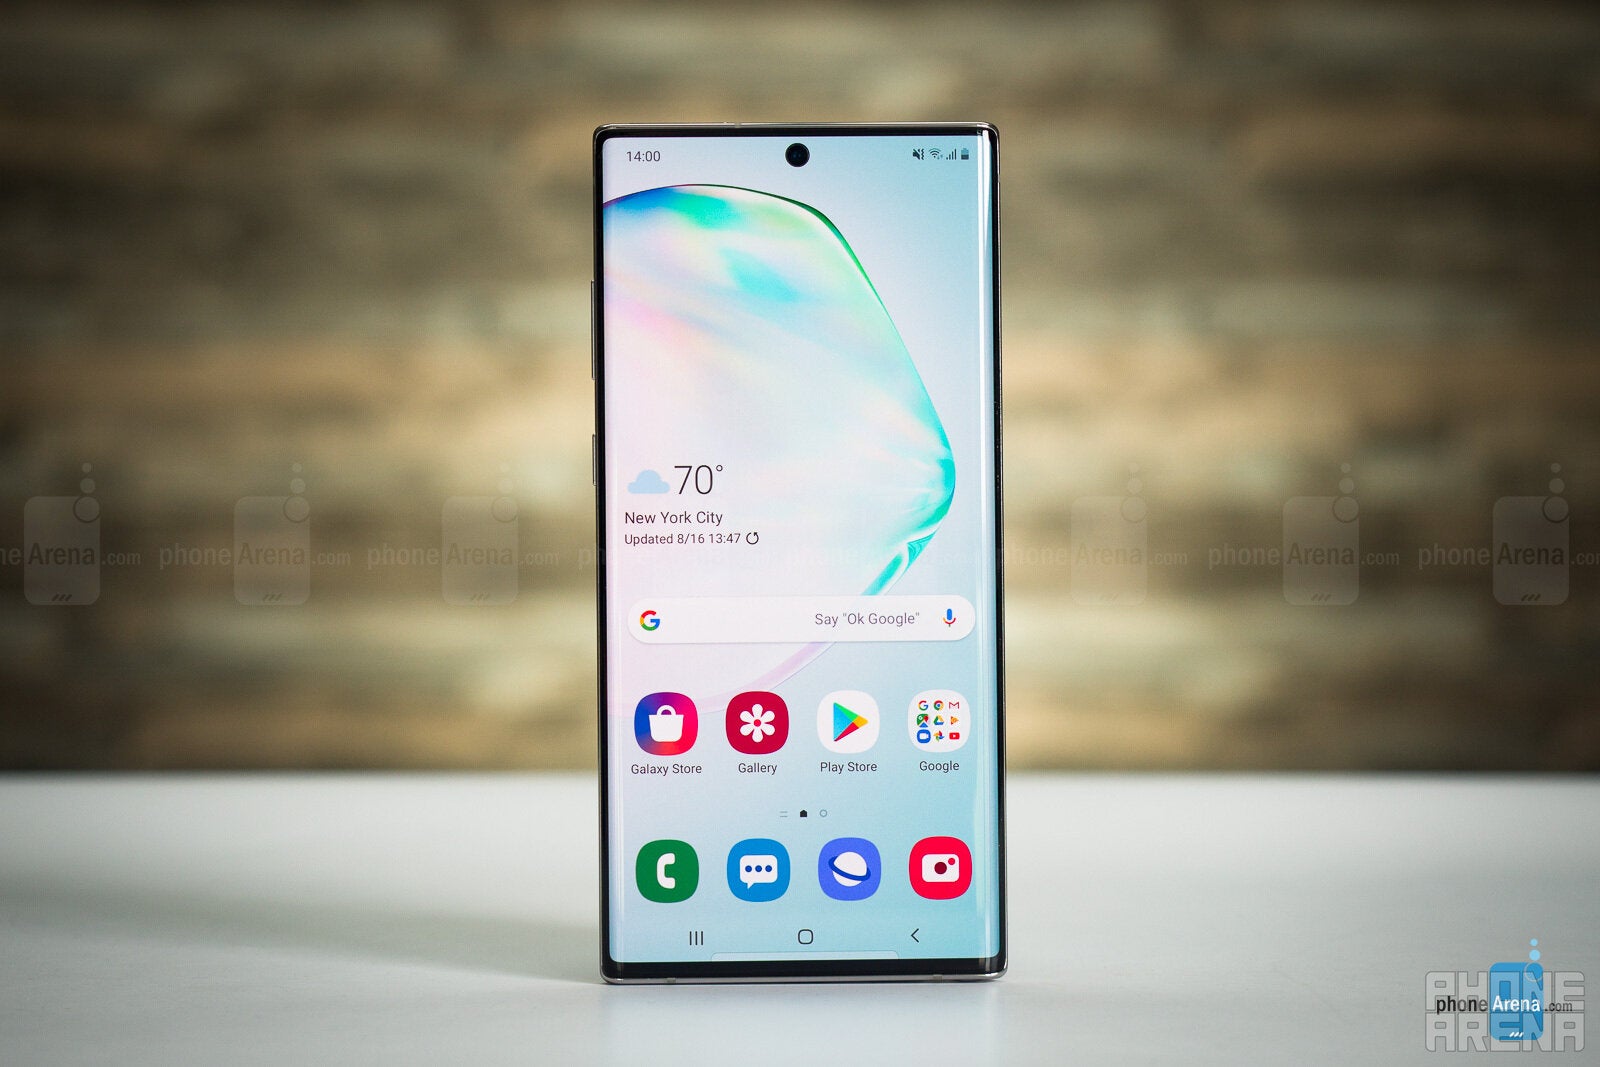 Samsung Galaxy Note10 Pro - Full Specification, price, review